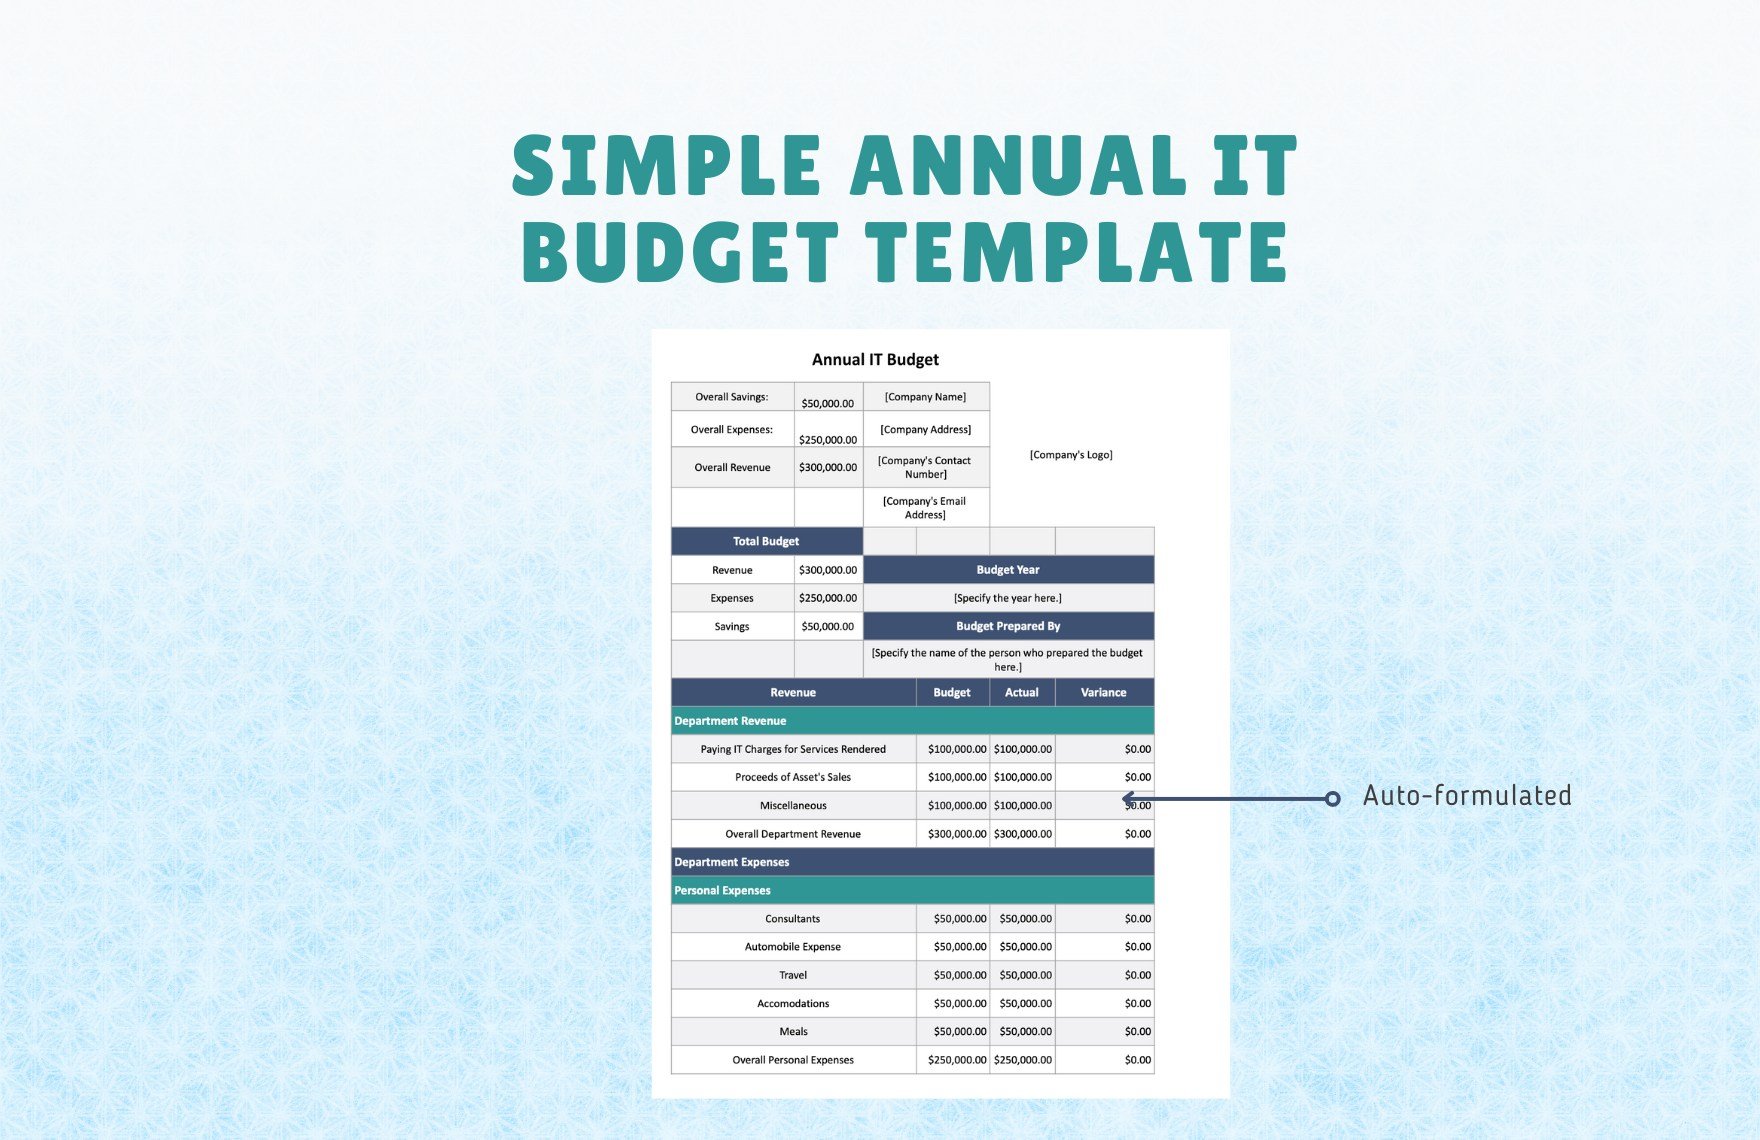 Simple Annual IT Budget Template